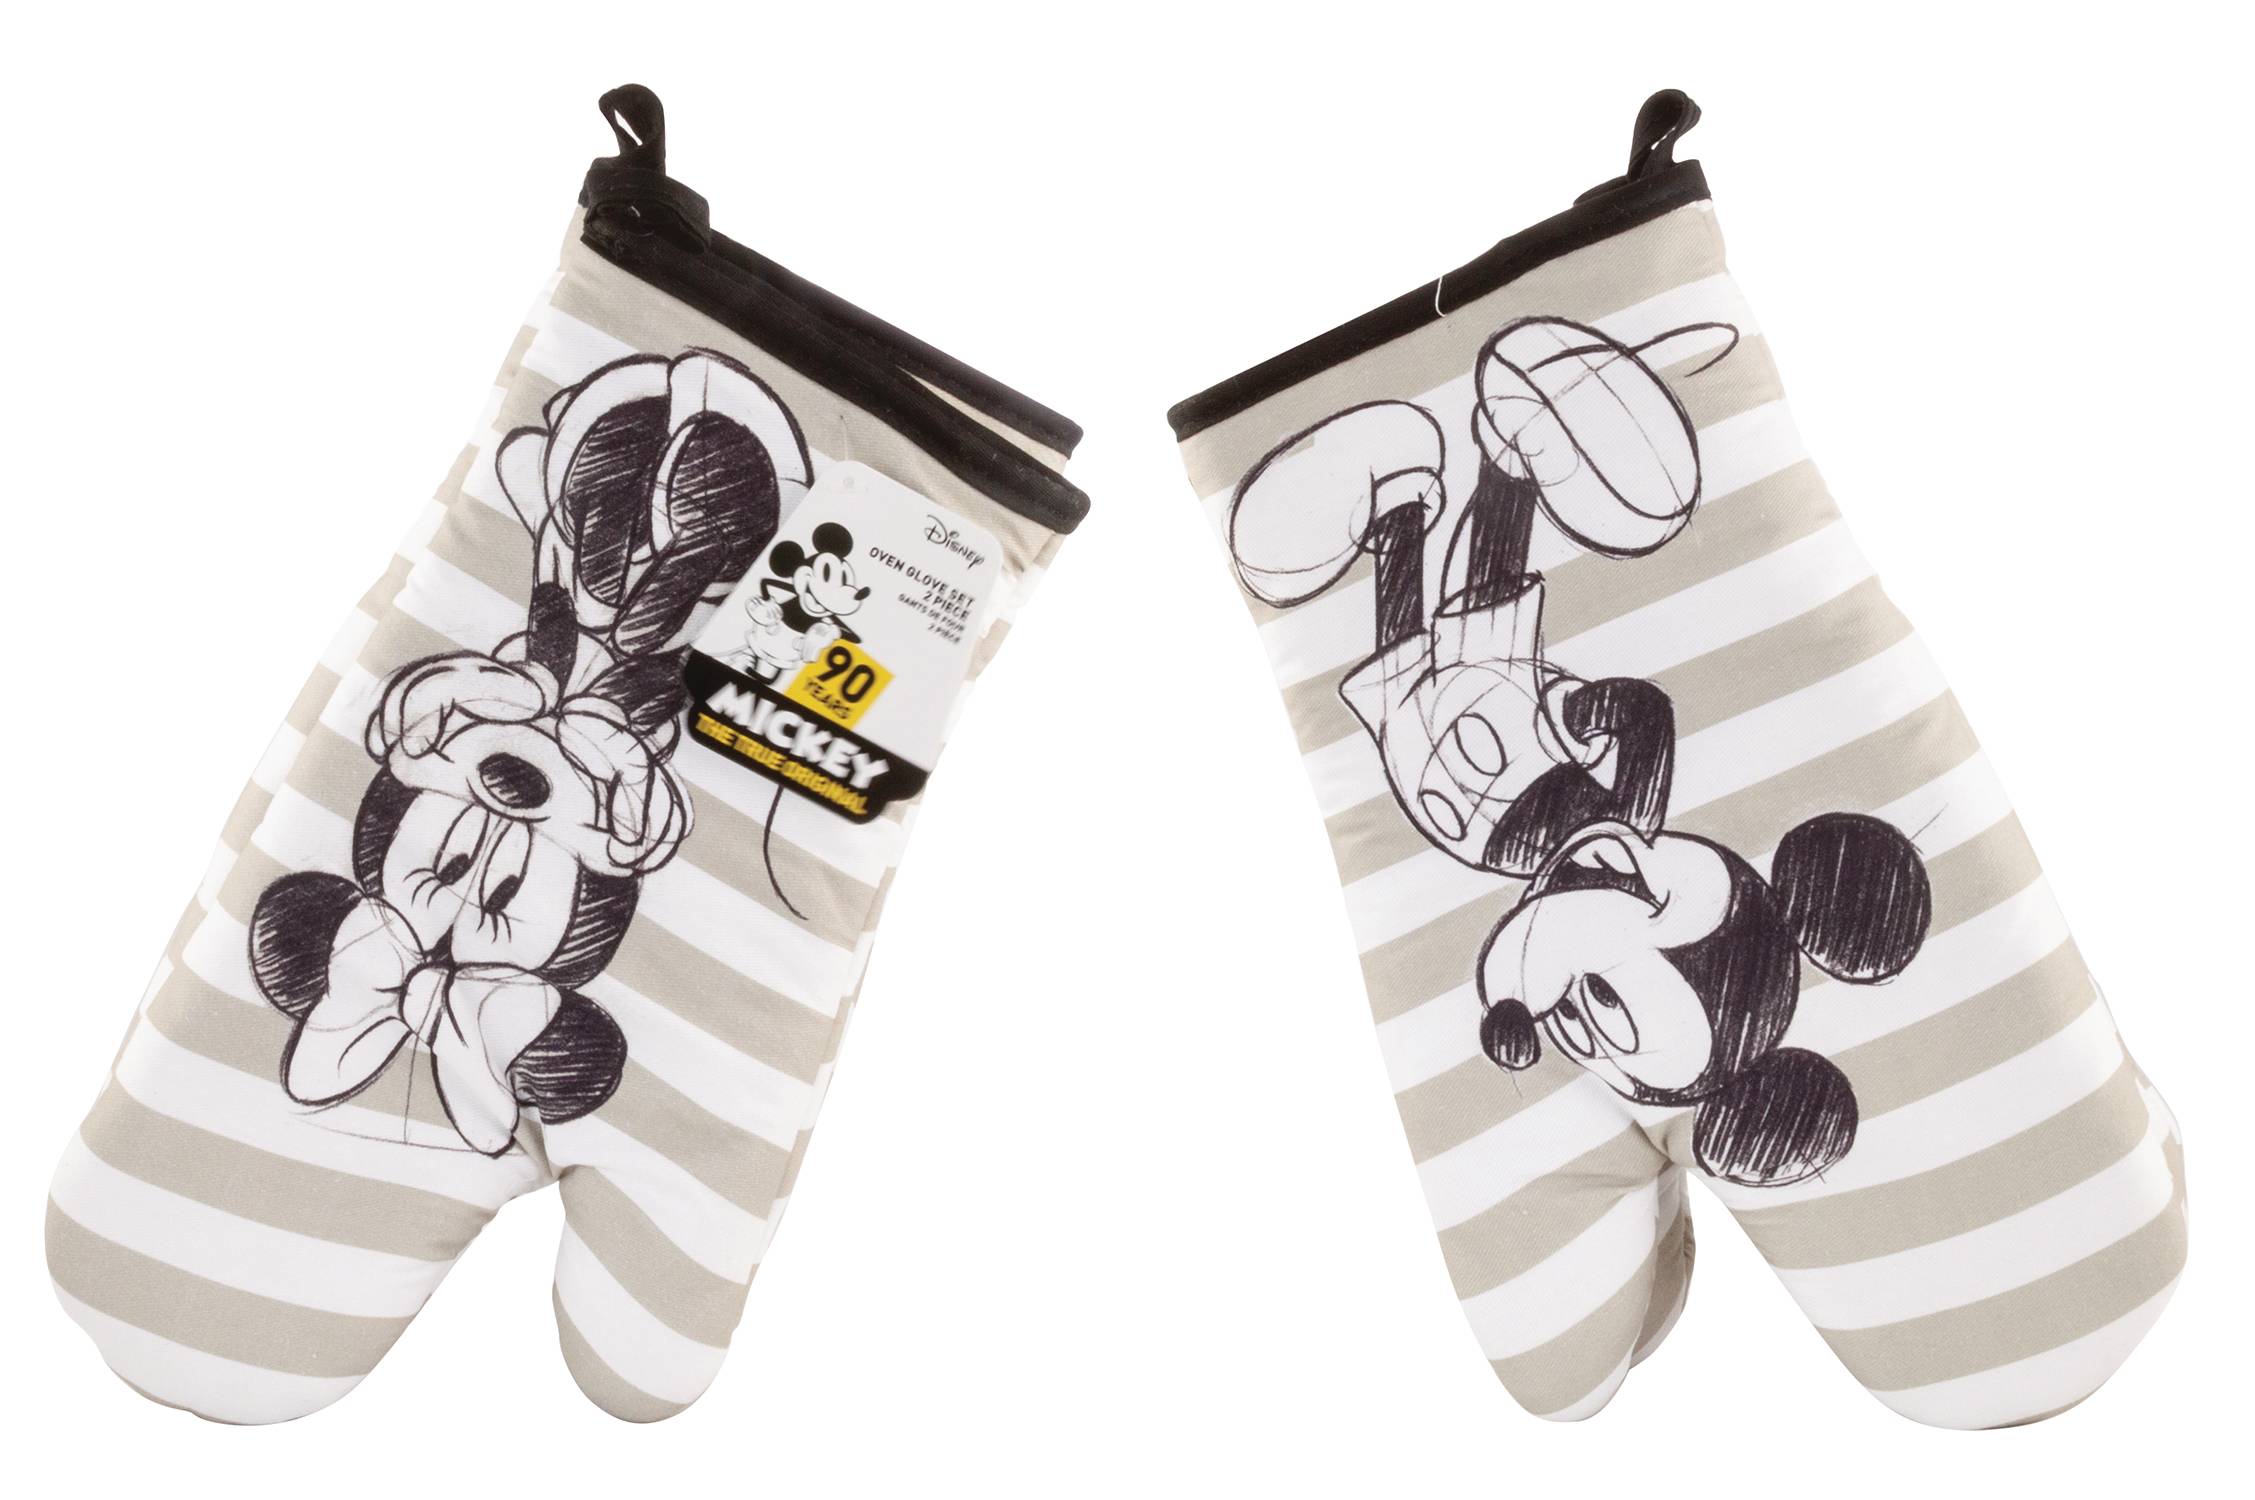 Disney Mickey Mouse Gloves Oven Mitts